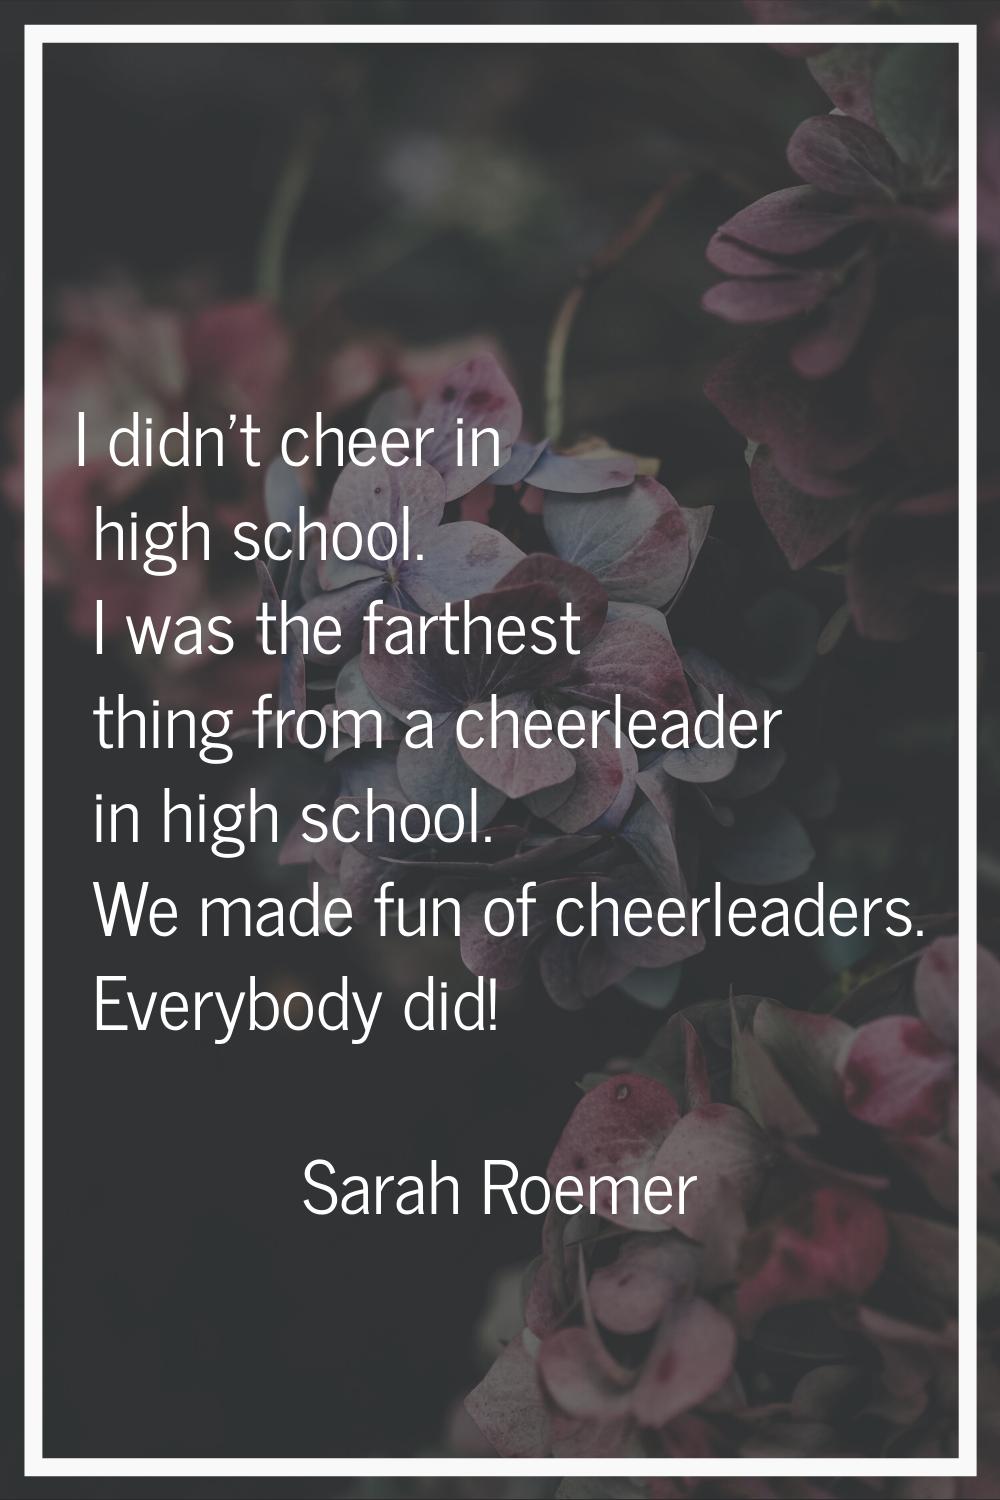 I didn't cheer in high school. I was the farthest thing from a cheerleader in high school. We made 